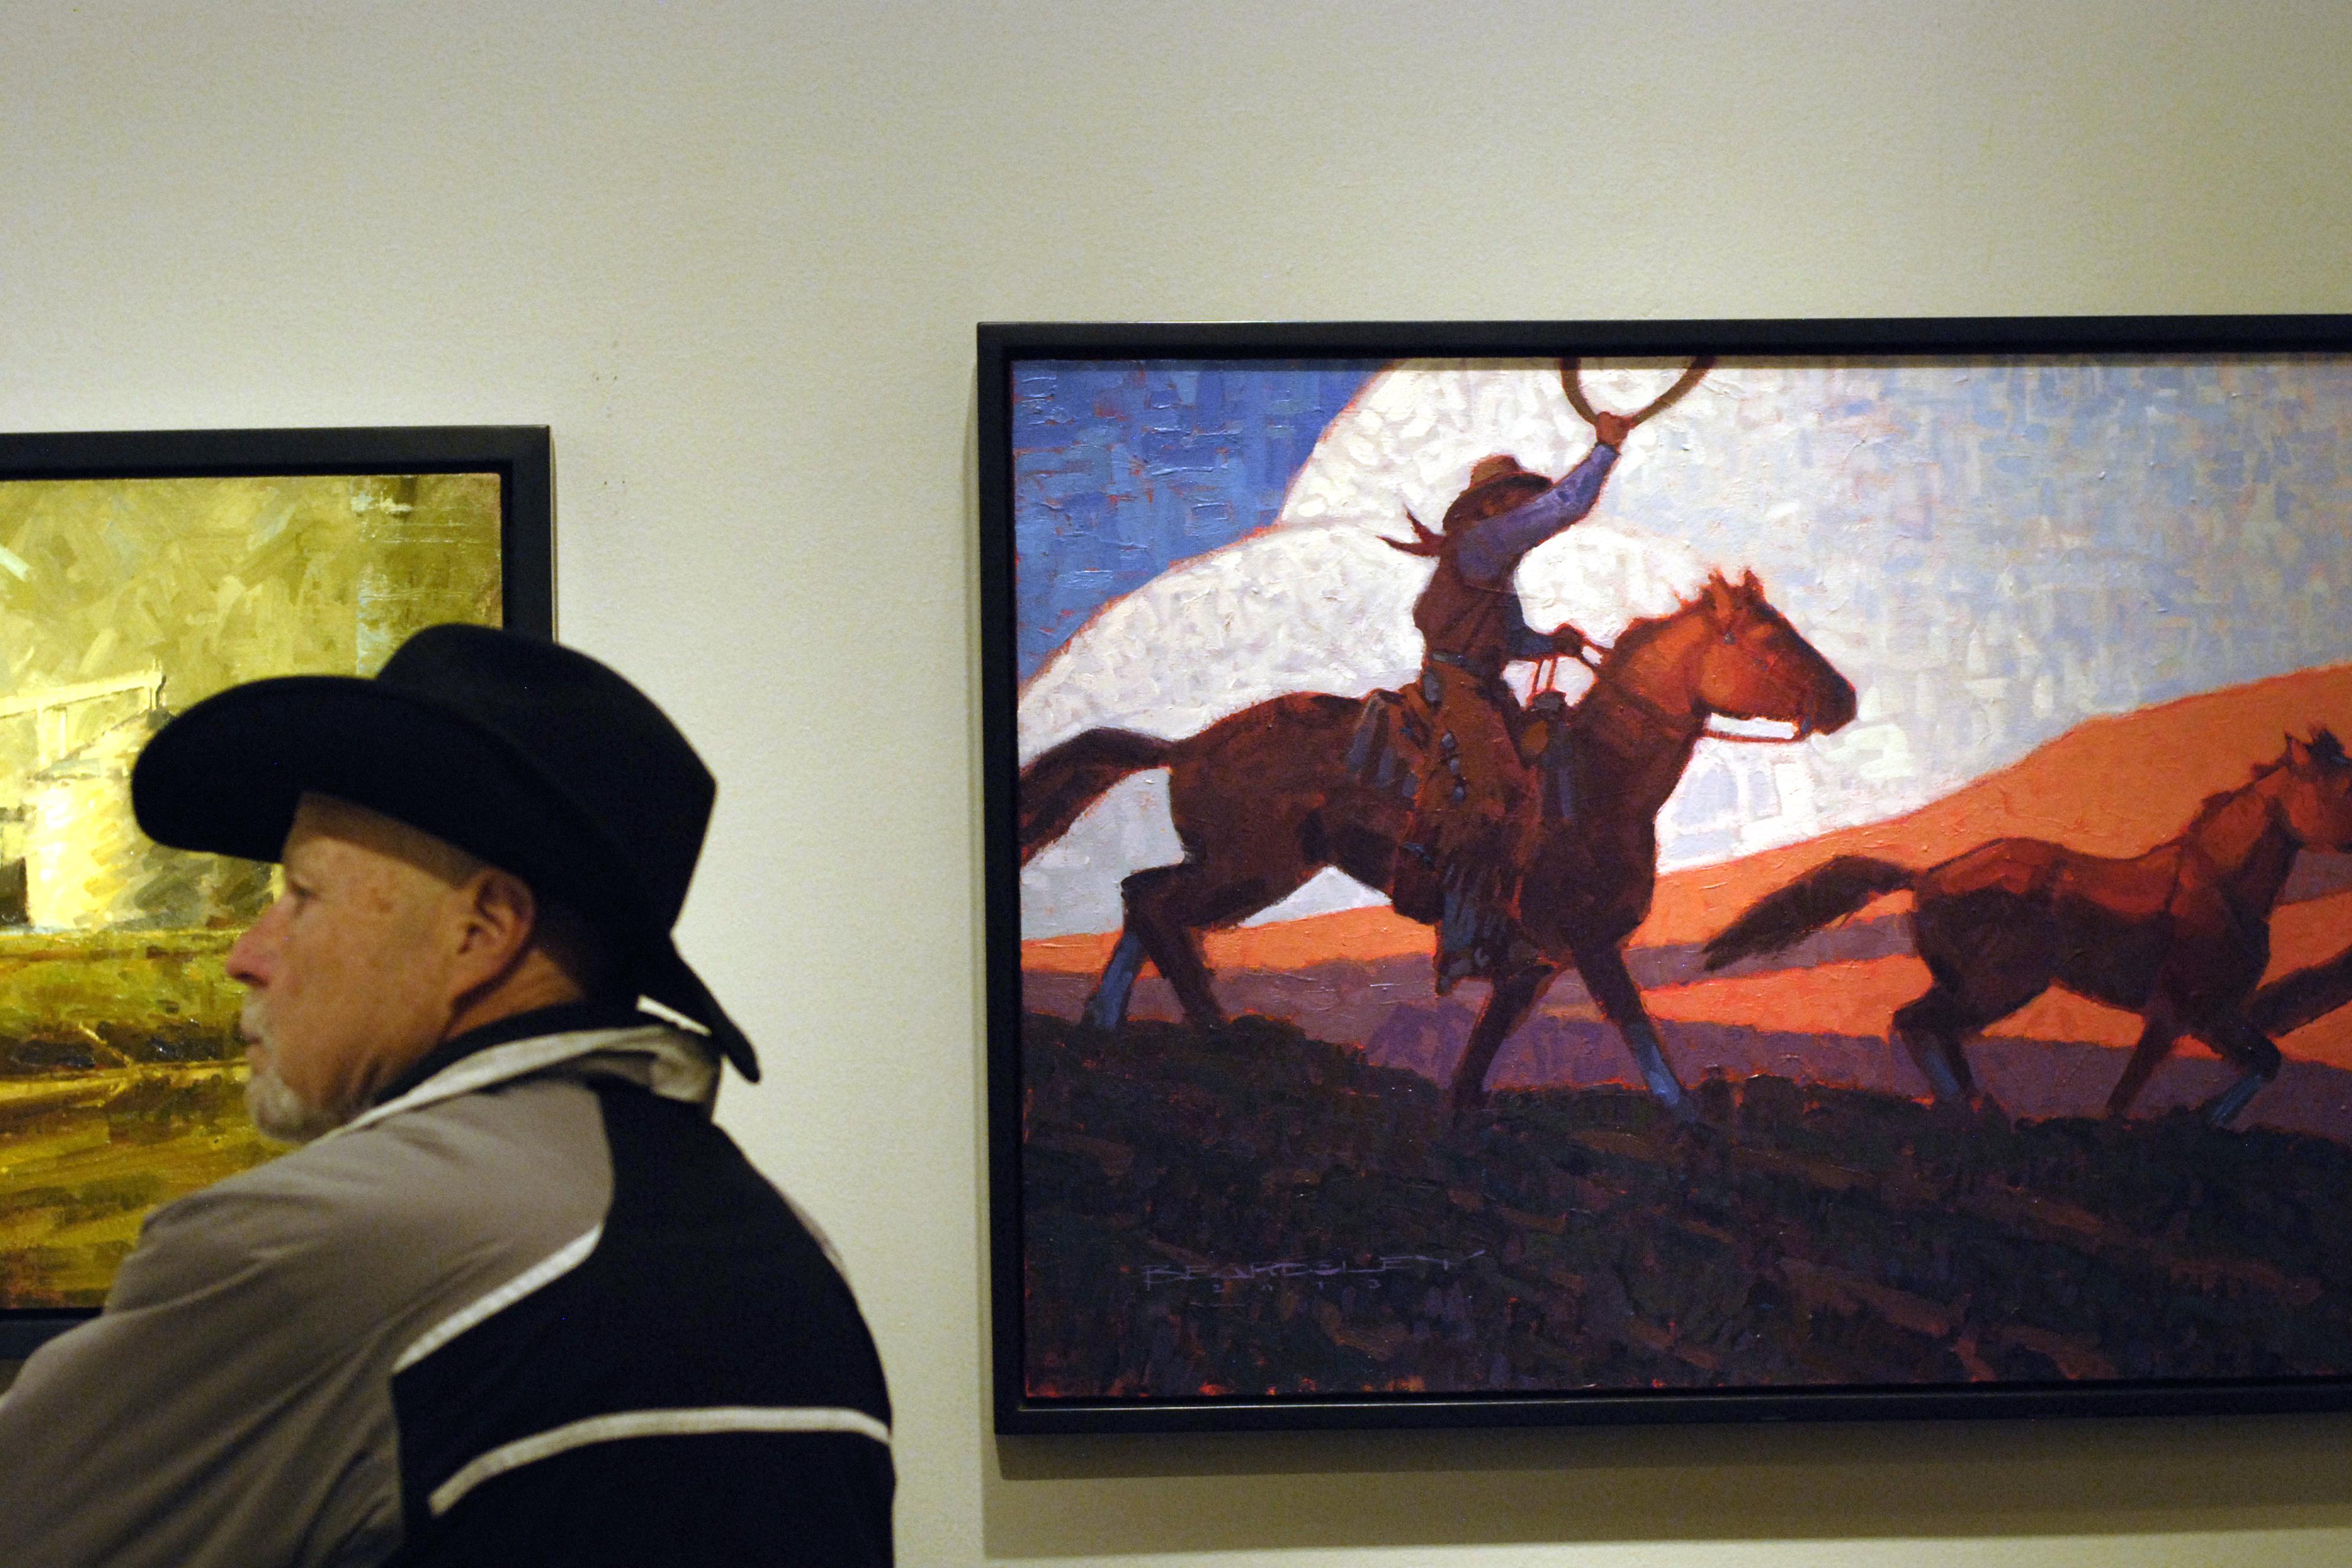 PHOTO: Cowboy art at the National Western Stock Show 2014